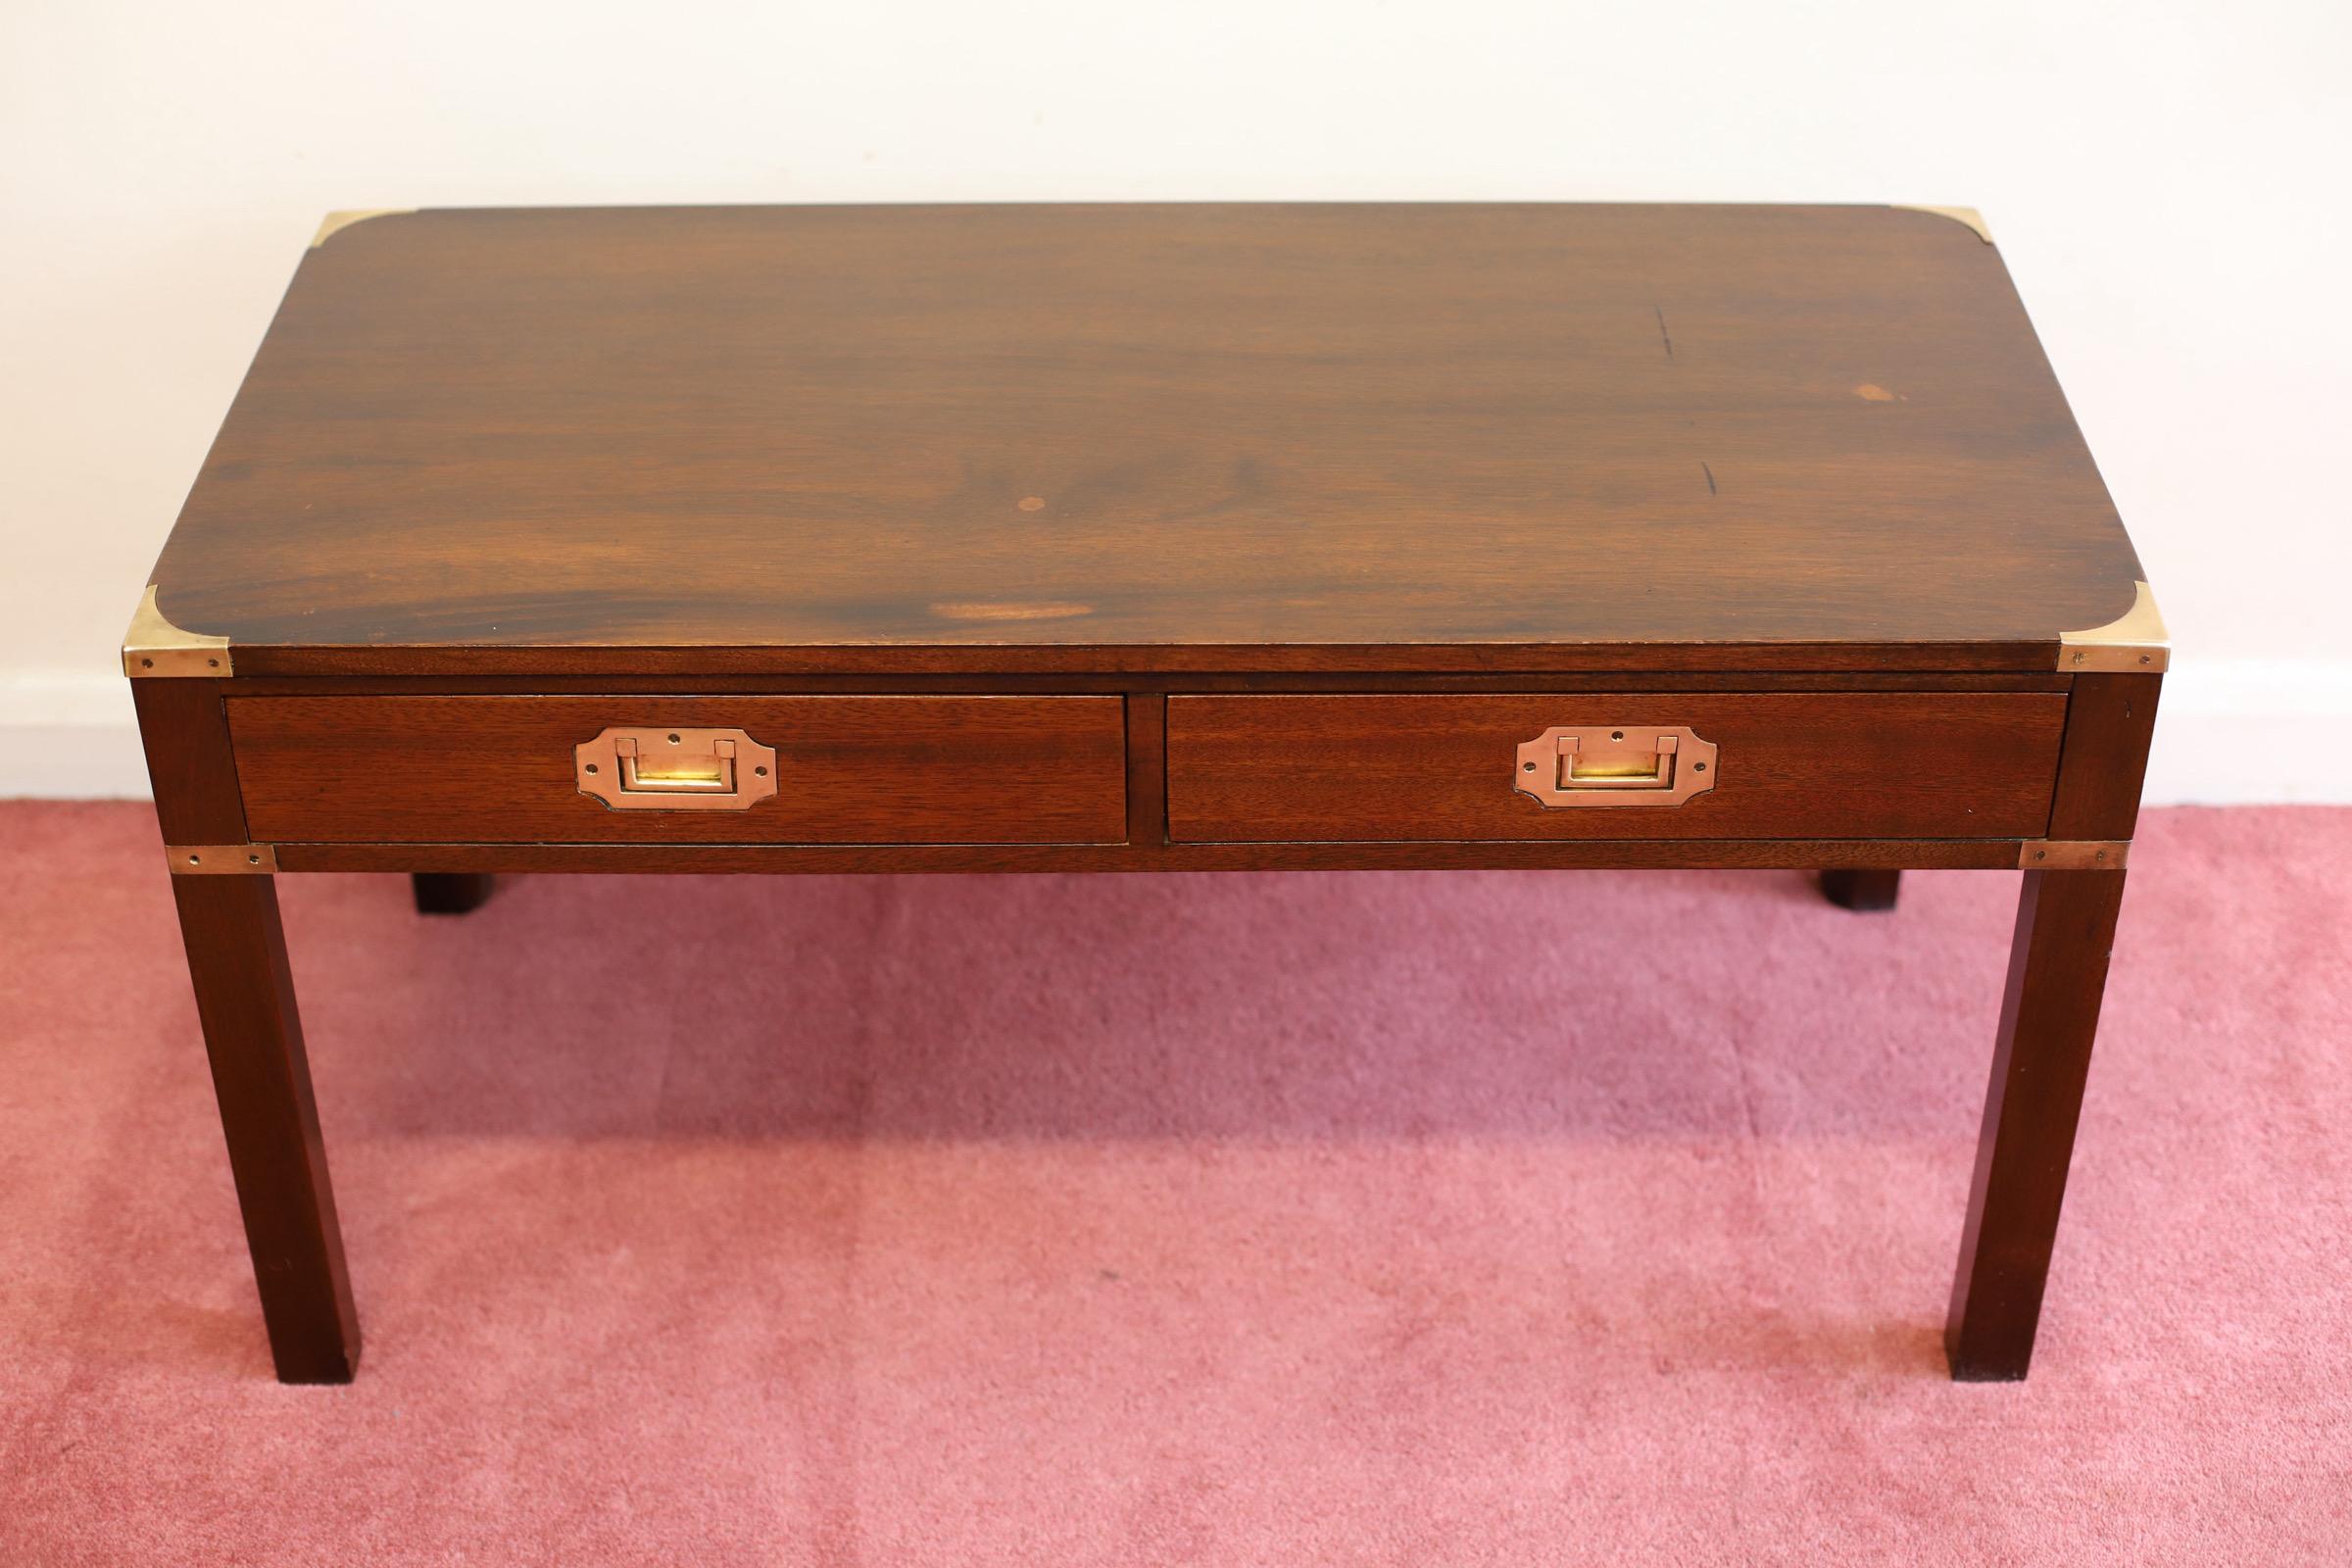 We delight to offer for sale this beautiful mahogany small military campaign table , with brass corner fittings and sunken military brass handles and two drawers on the front , in good condition.
Don't hesitate to contact me if you have any